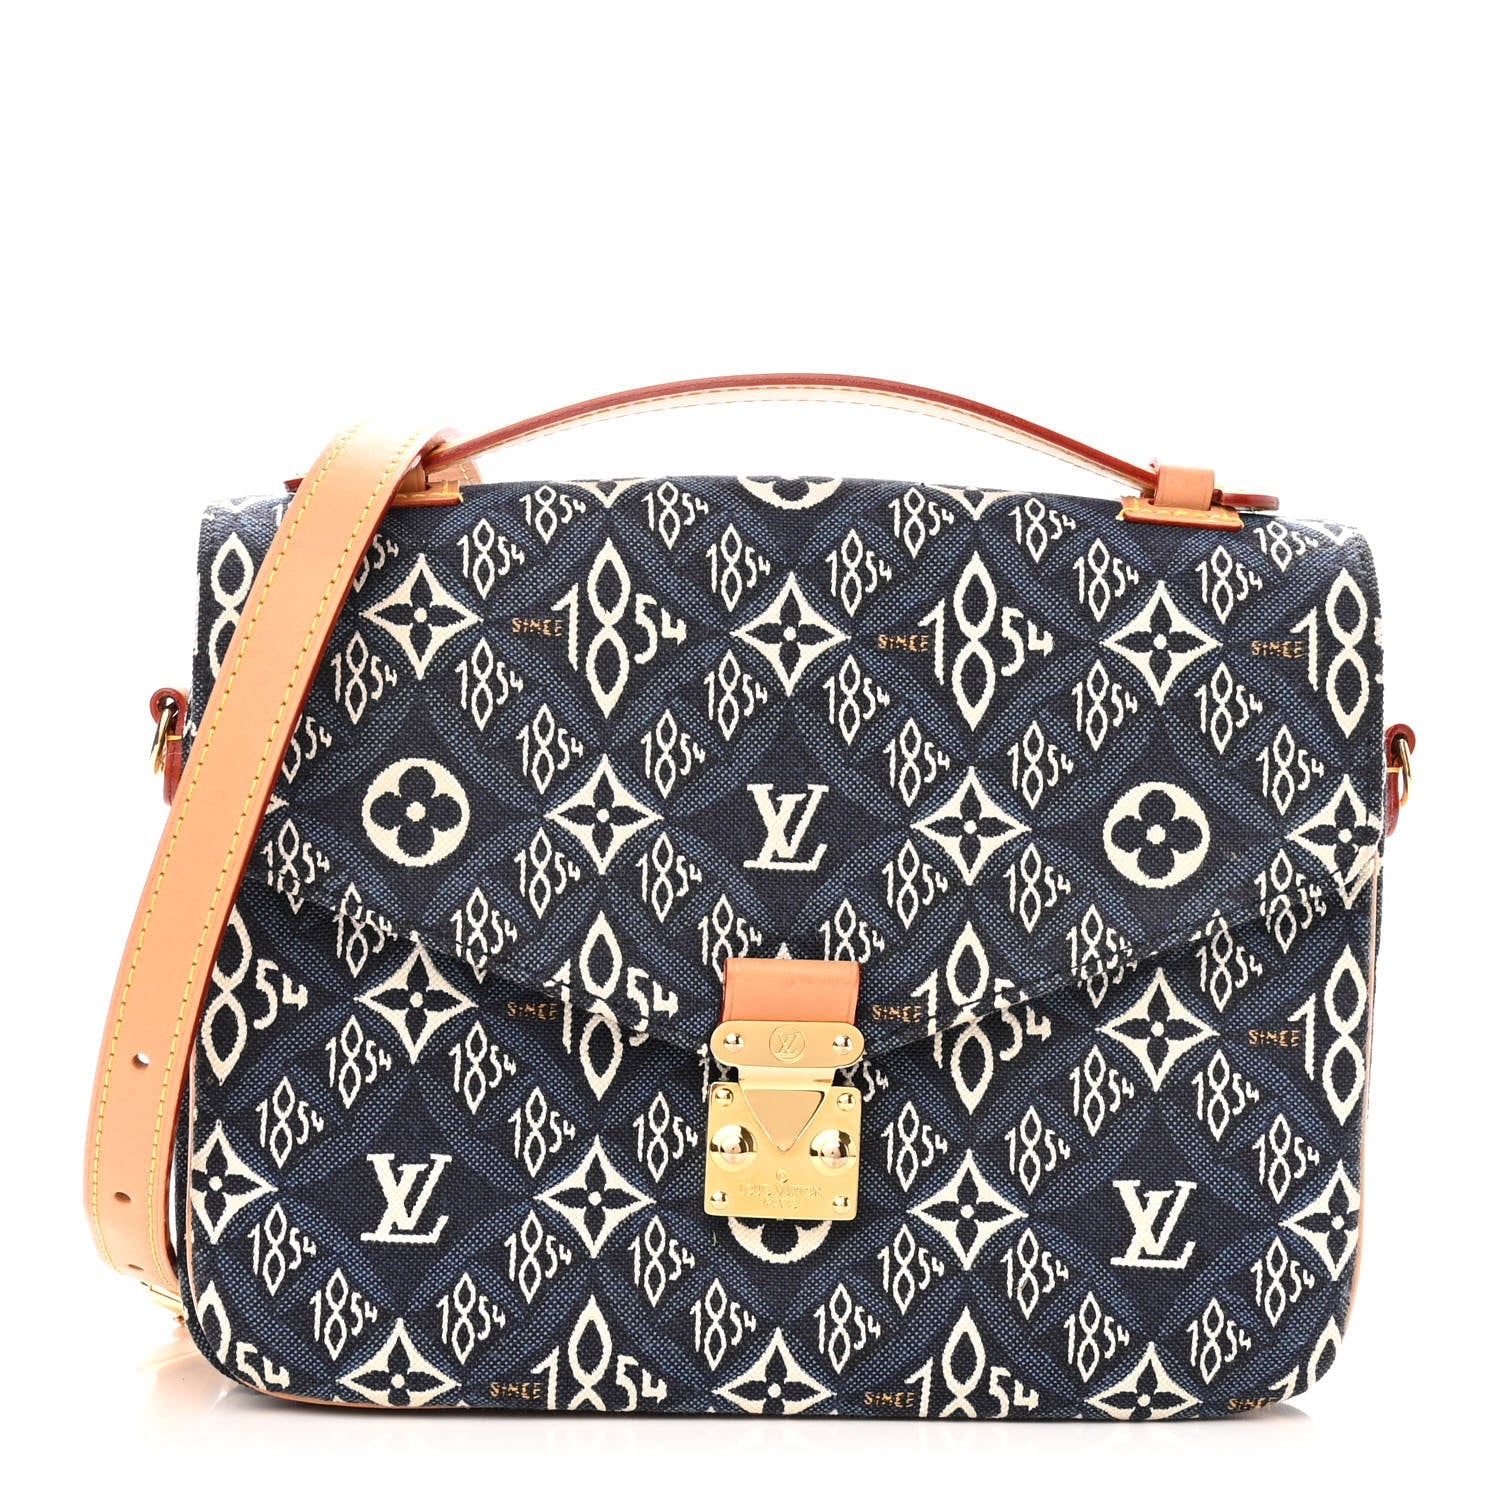 Louis Vuitton Limited Edition Pochette Metis in Since 1854